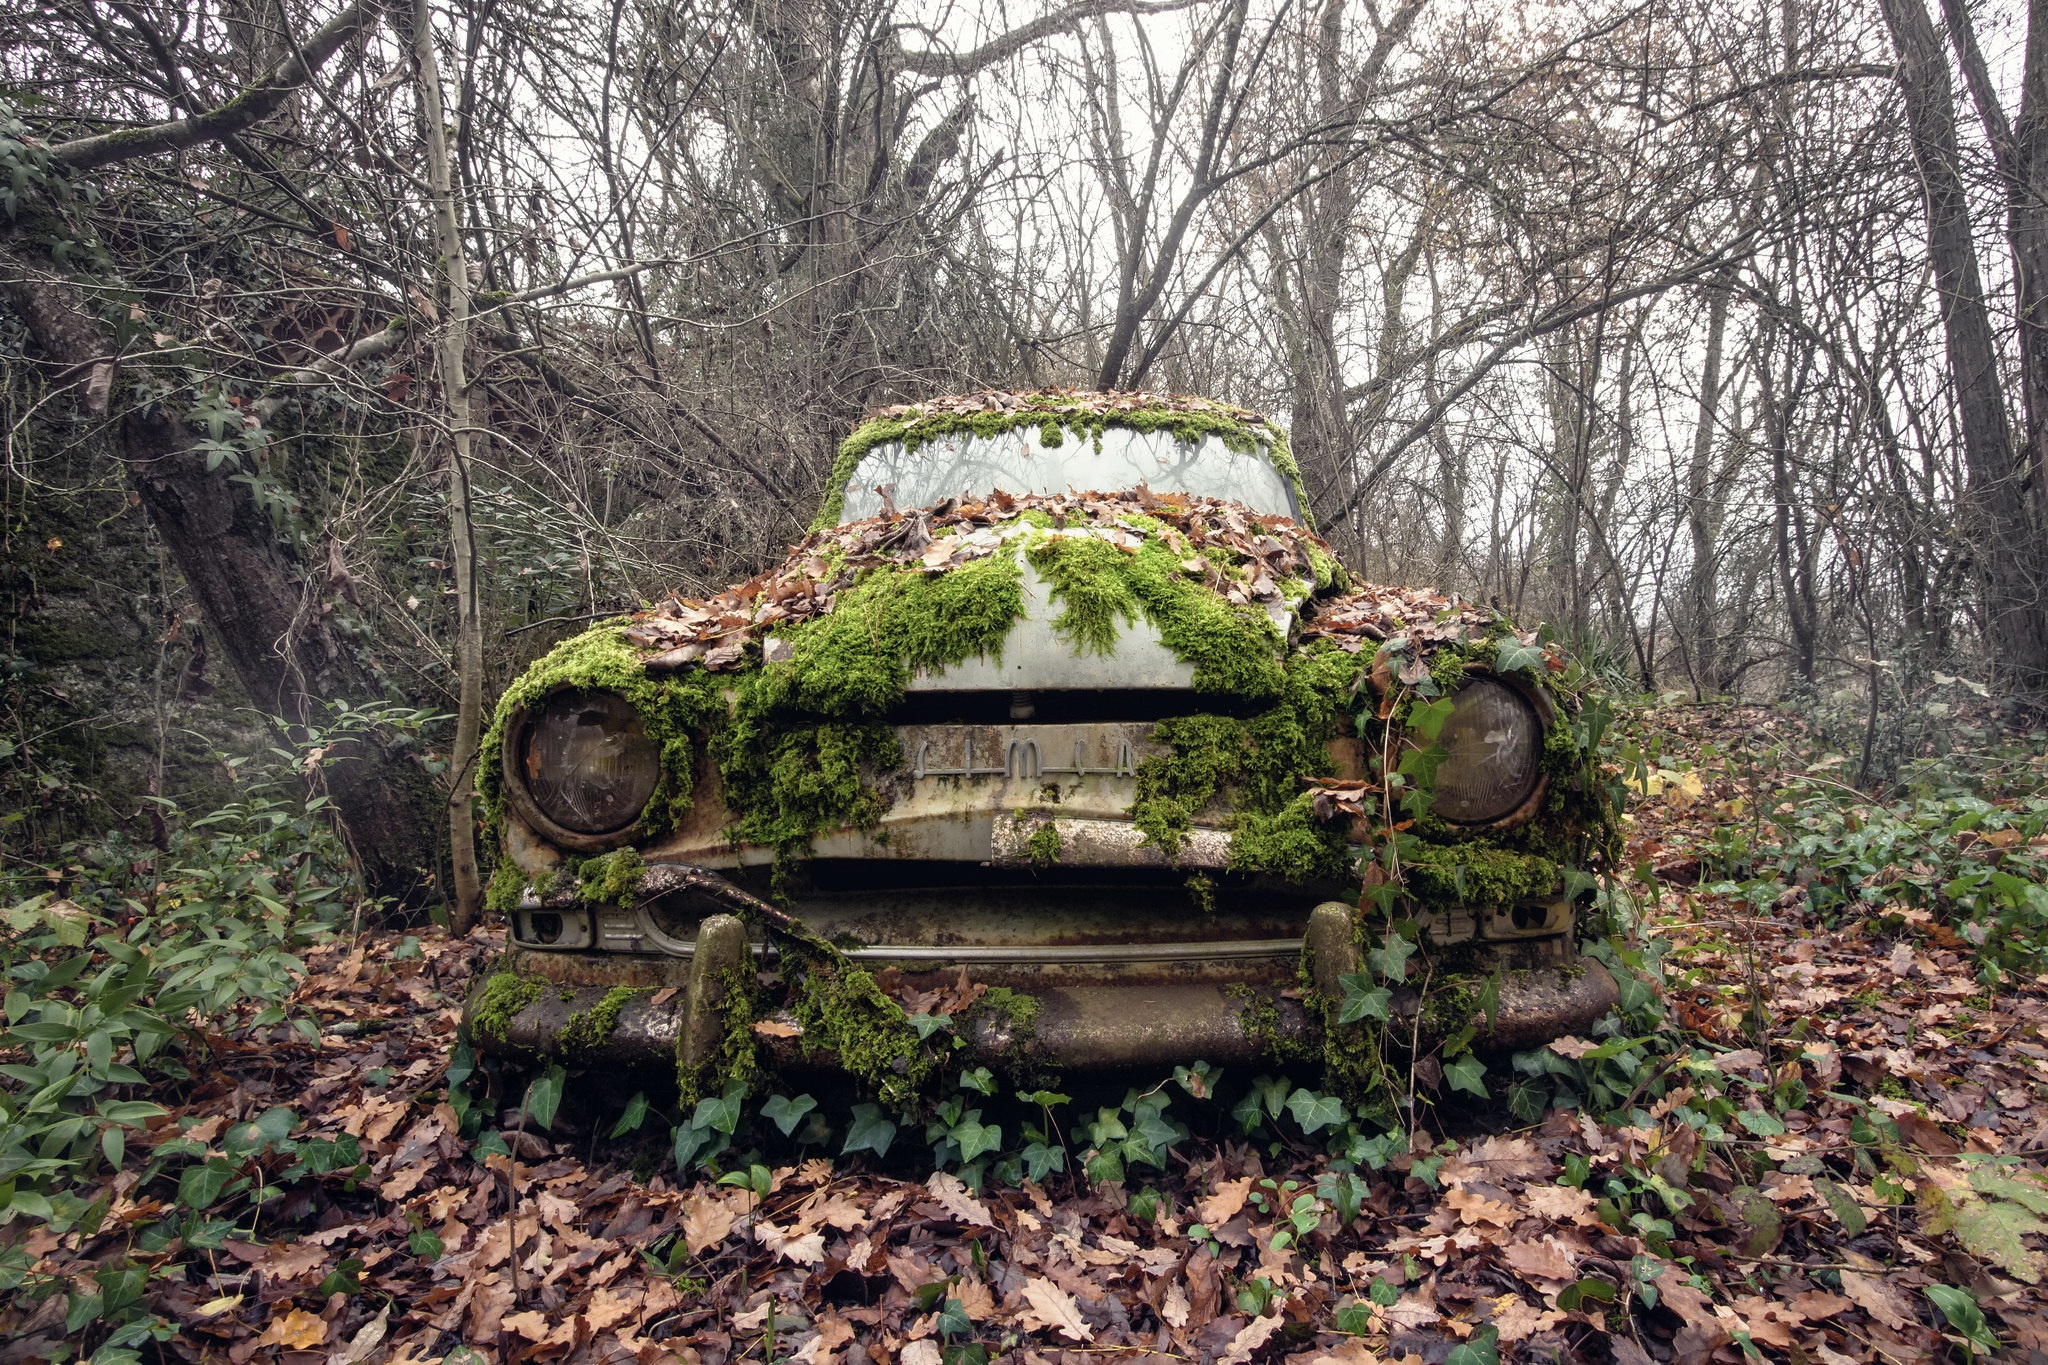 General 2048x1365 outdoors car vehicle wreck plants